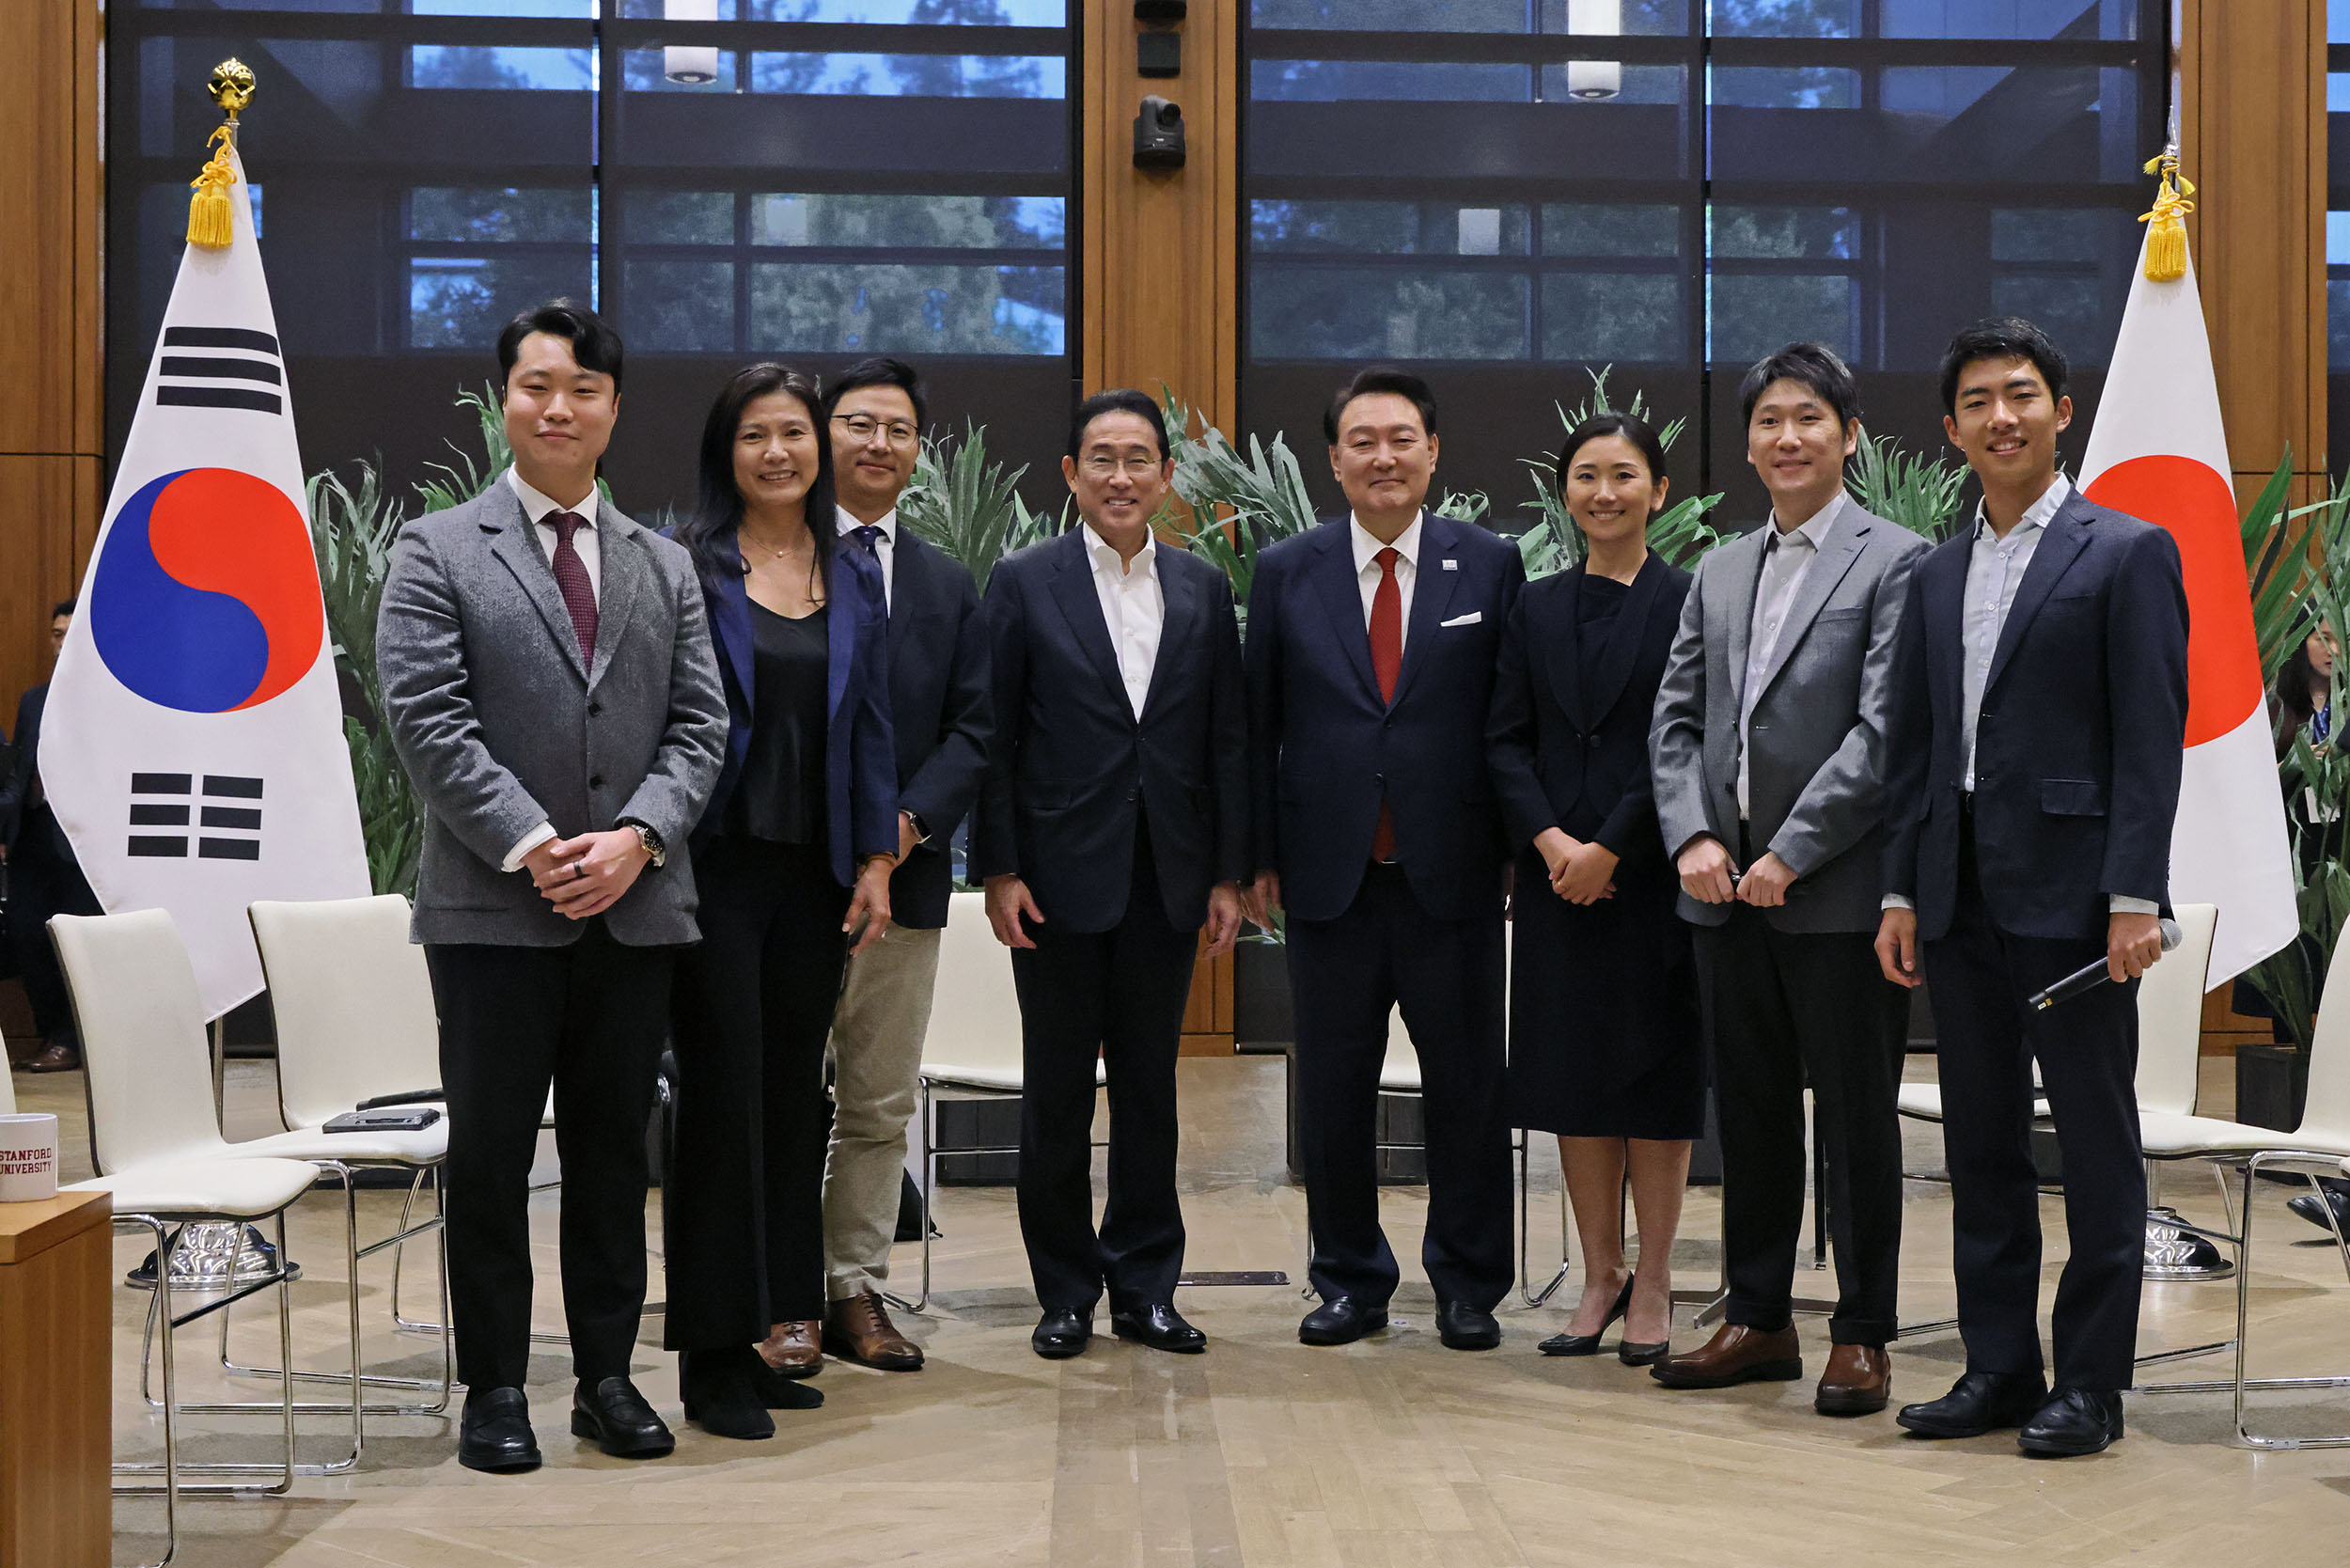 Prime Minister Kishida attending a roundtable with Japanese and Korean startup companies (1)